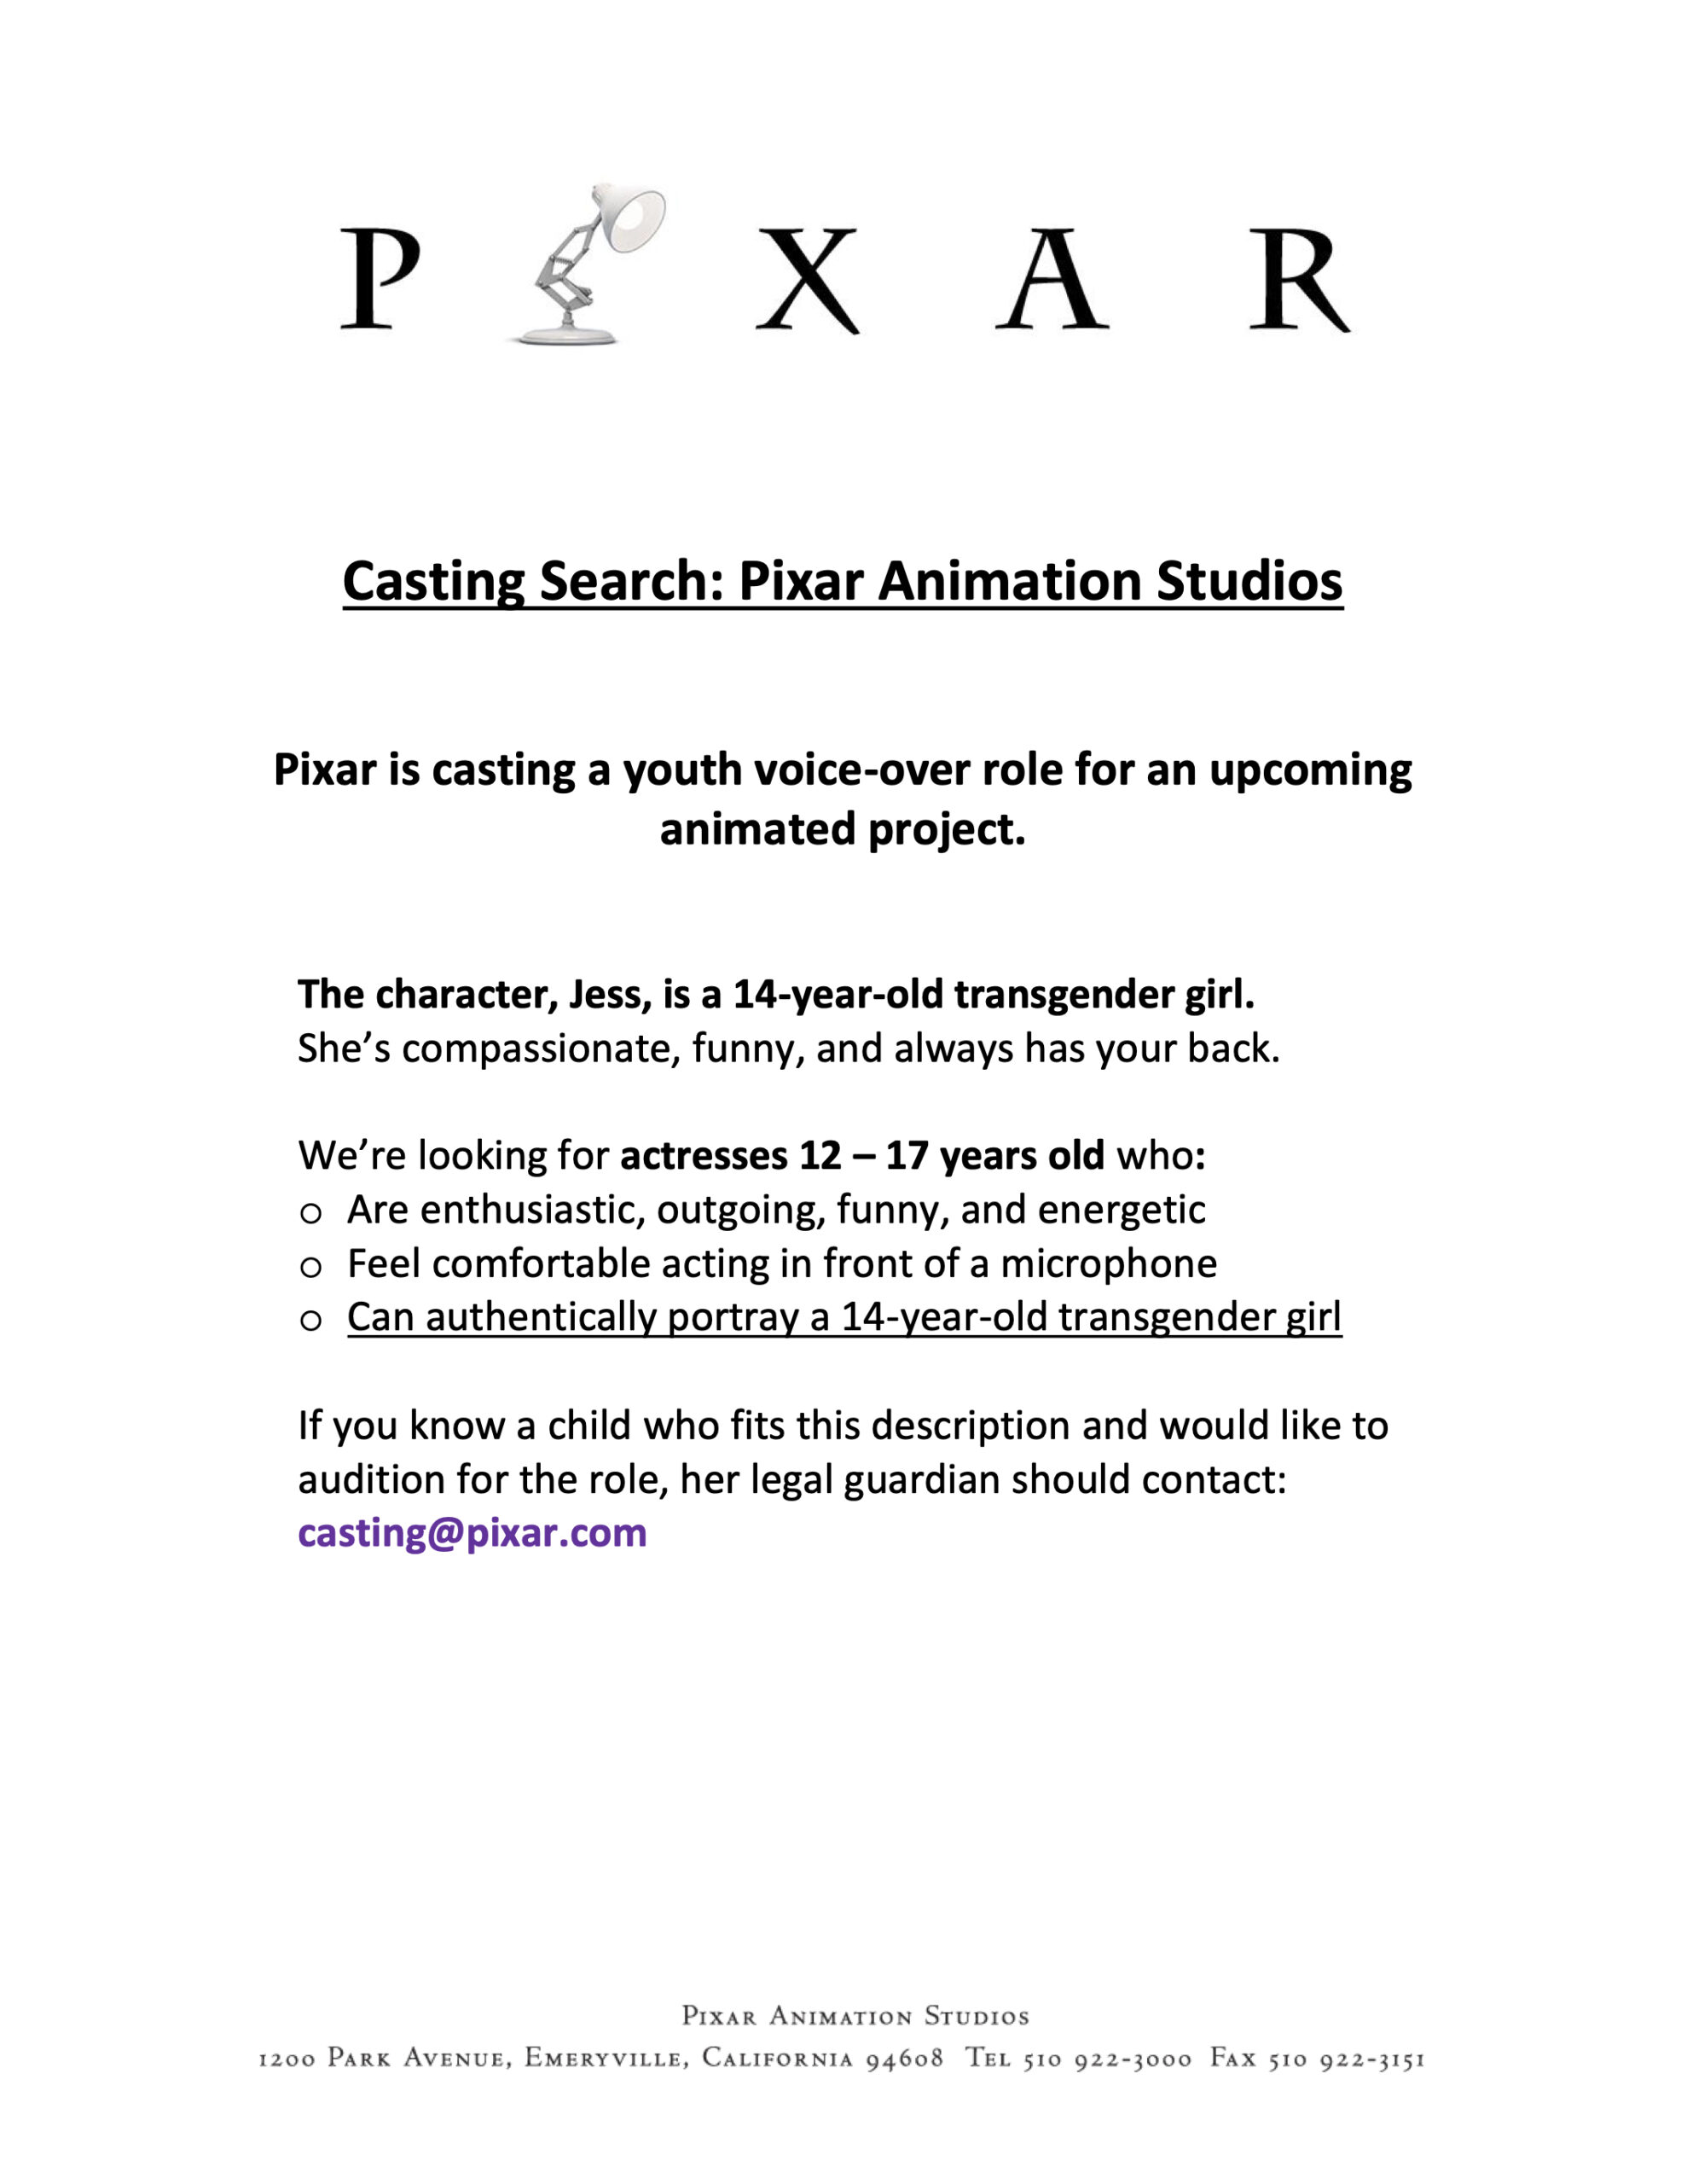 Pixar Announces Casting Search for Their First Transgender Role